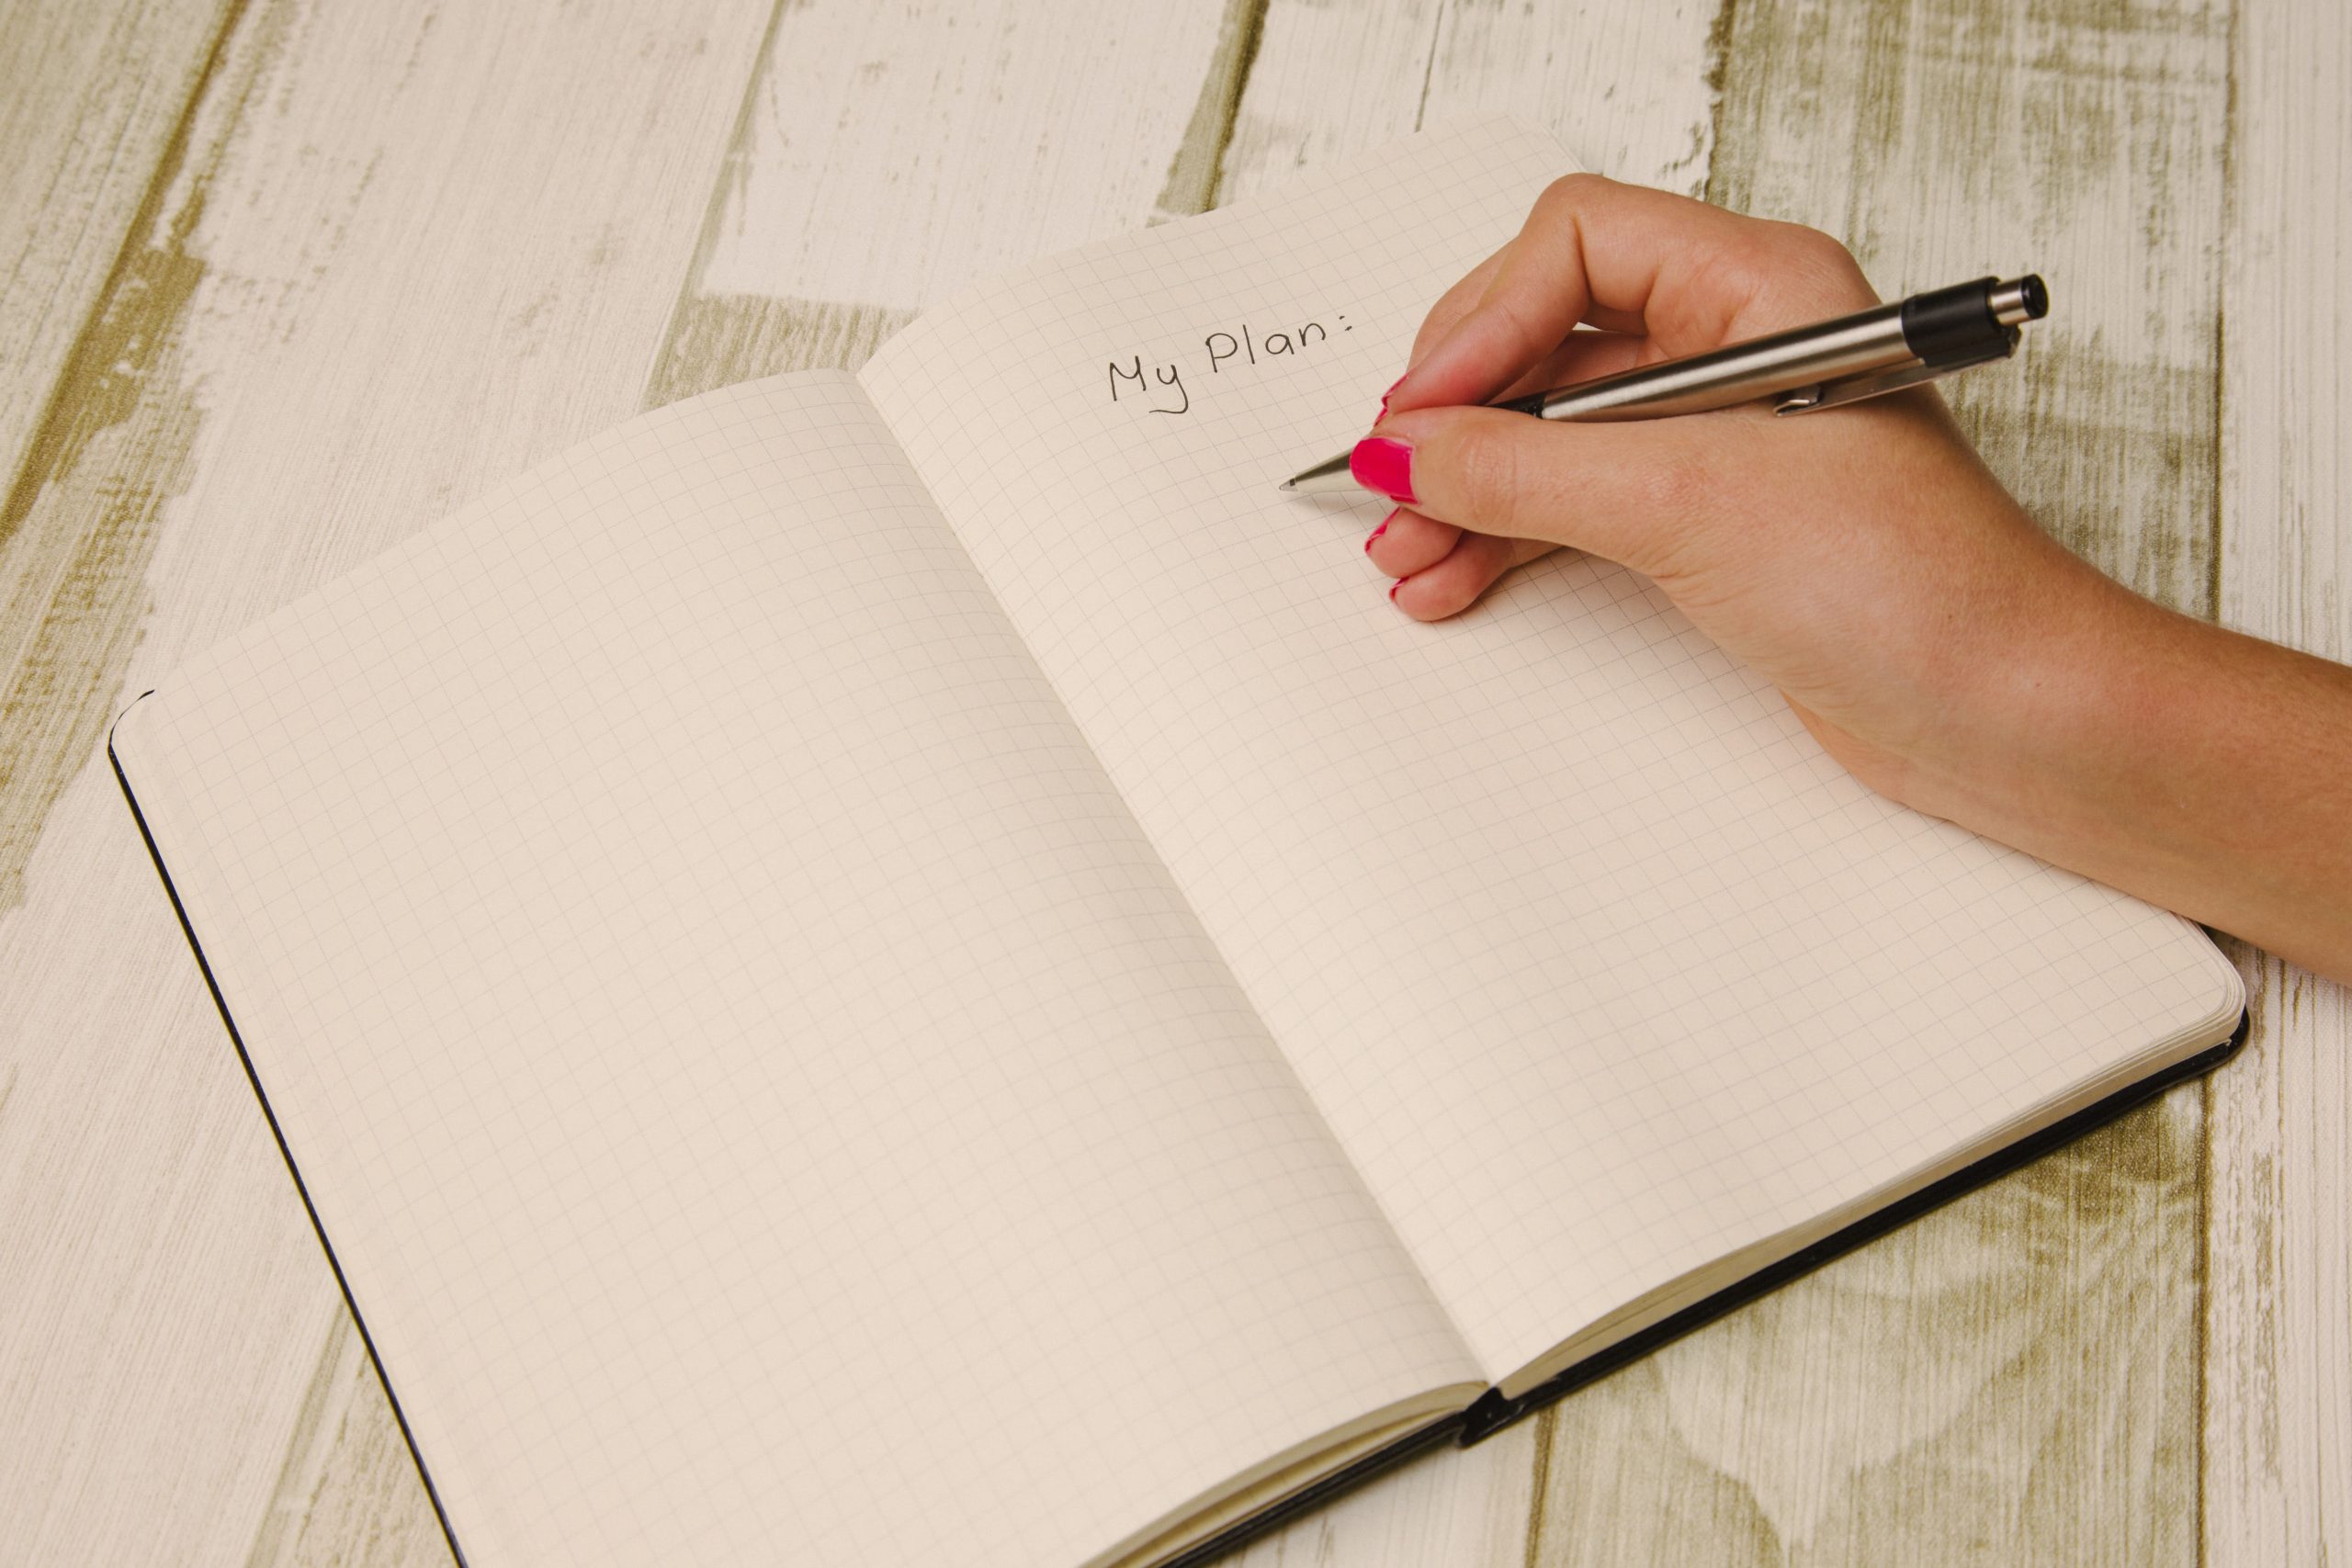 Female hand holding a pen and writing a plan in a planner for planning a digital job ad.